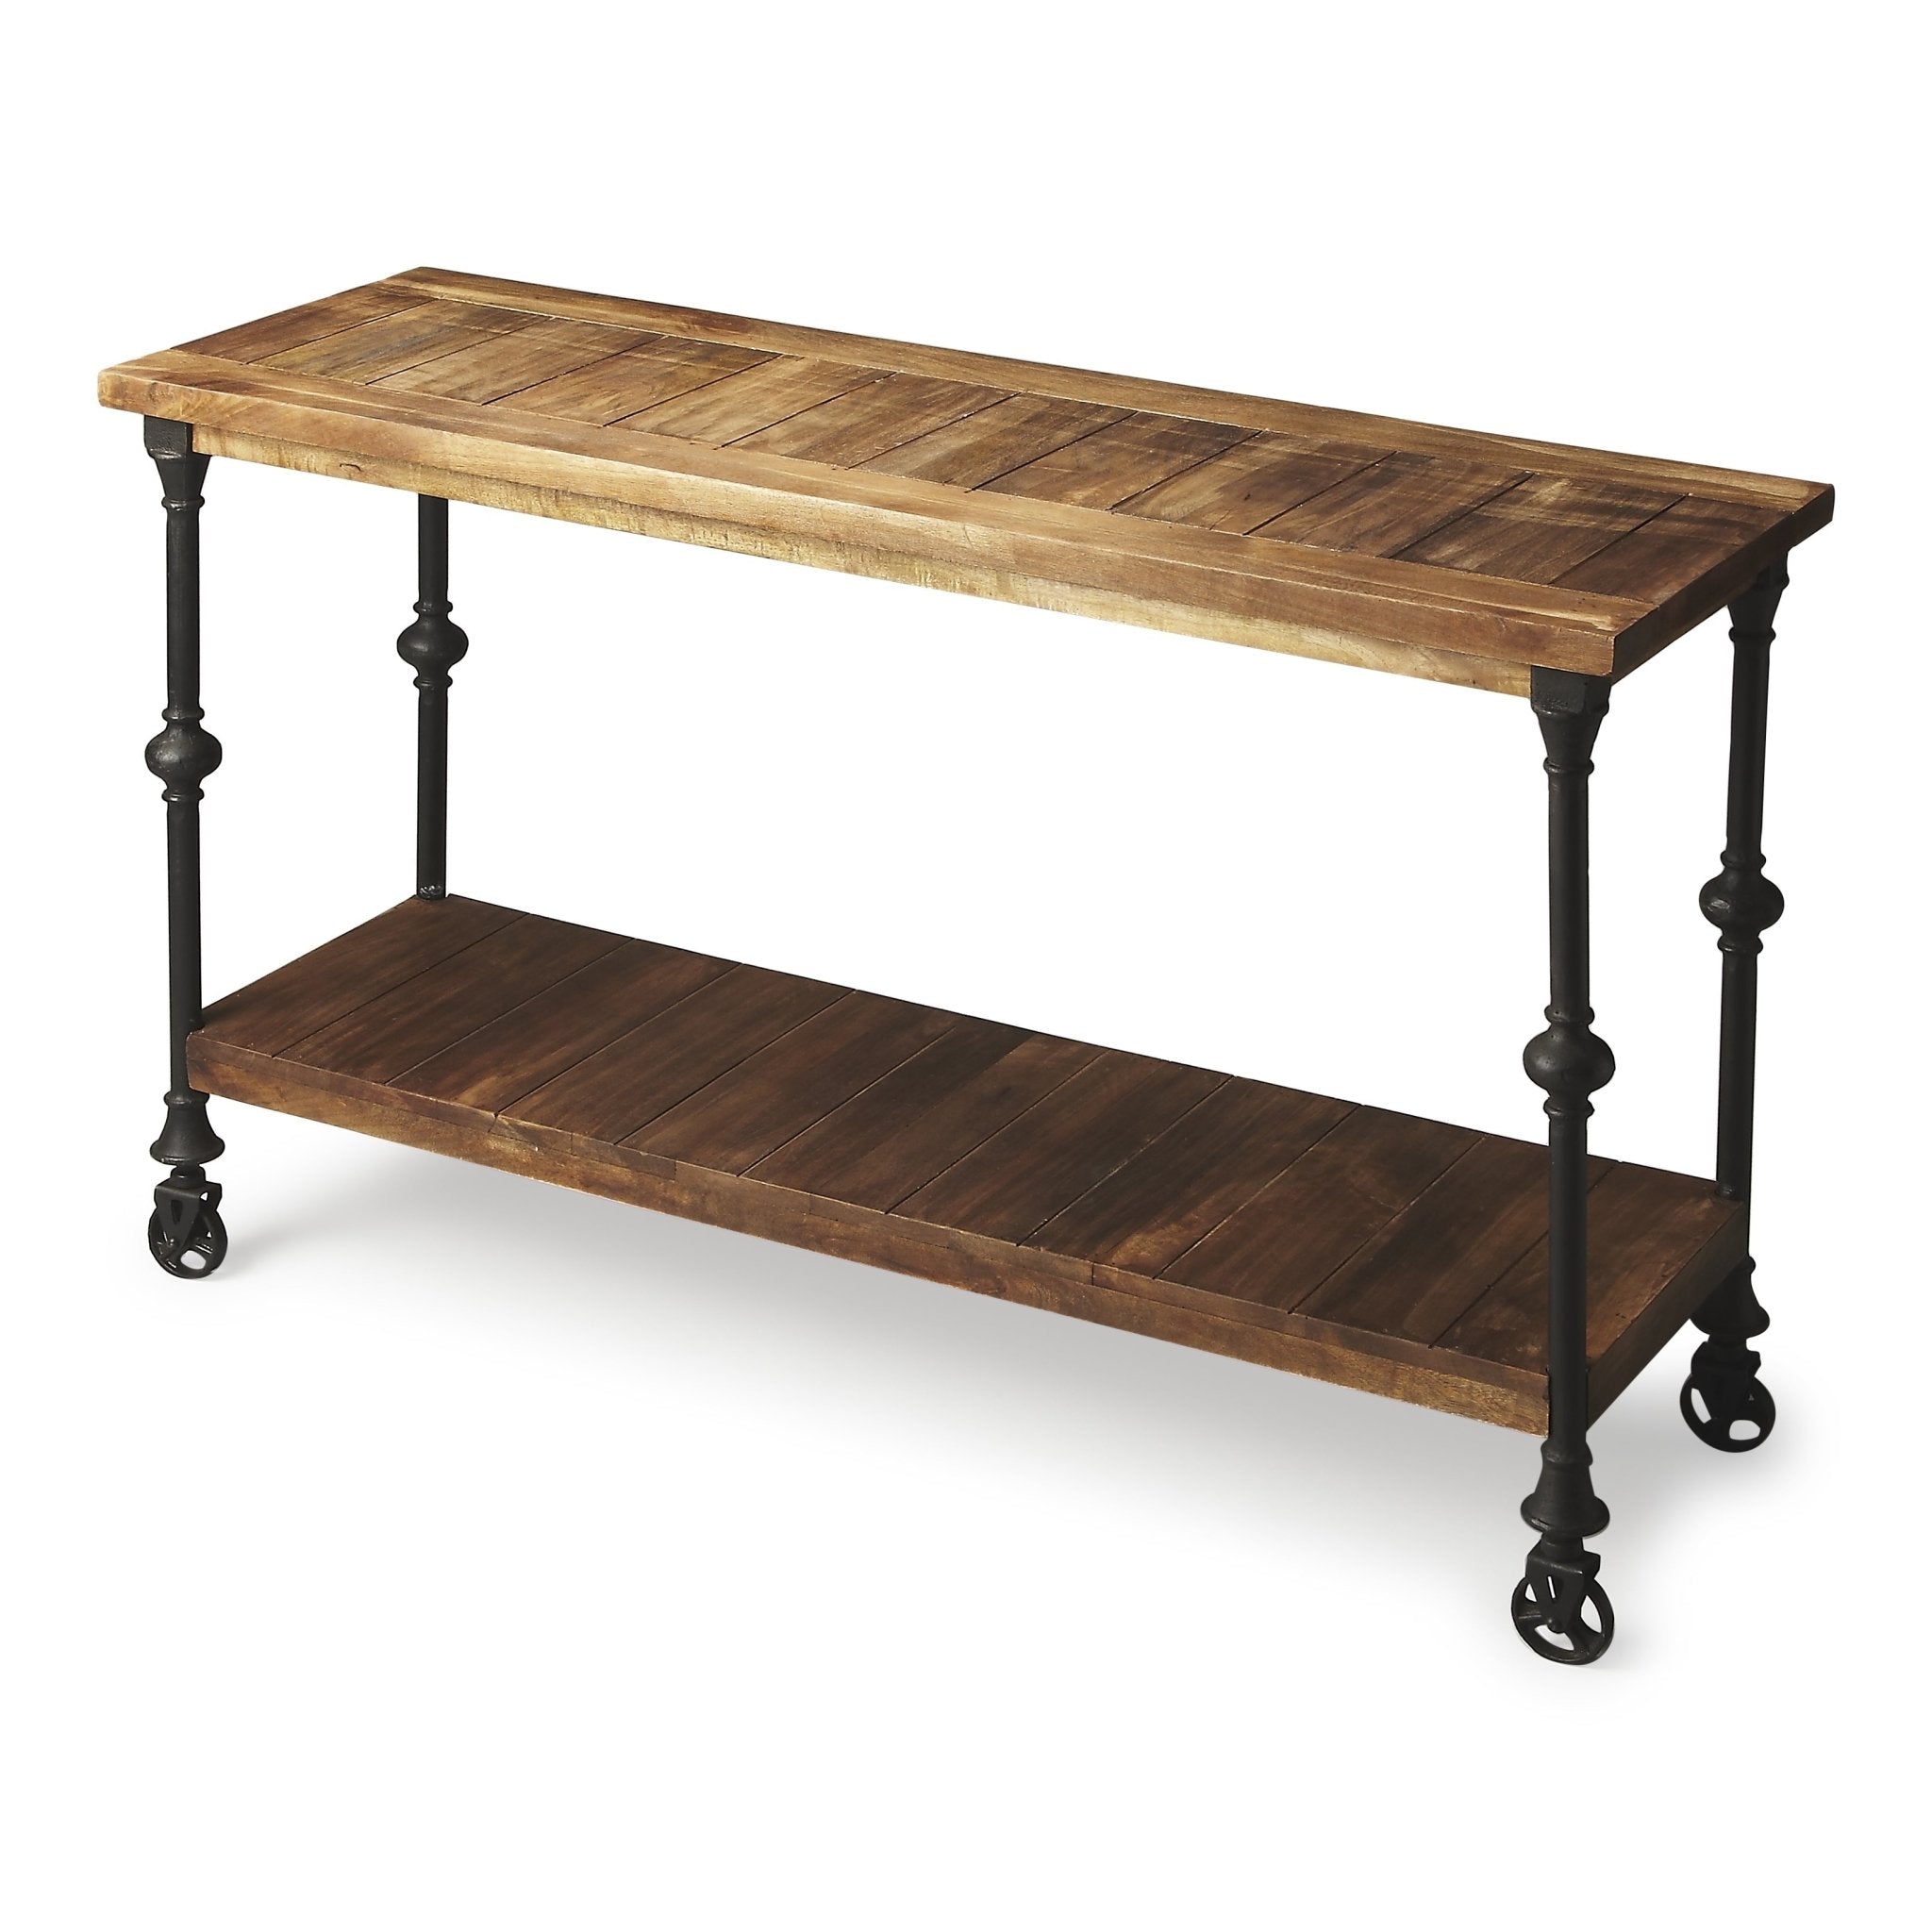 Fontainebleau Industrial Chic Console Table - Furniture - Tipplergoods